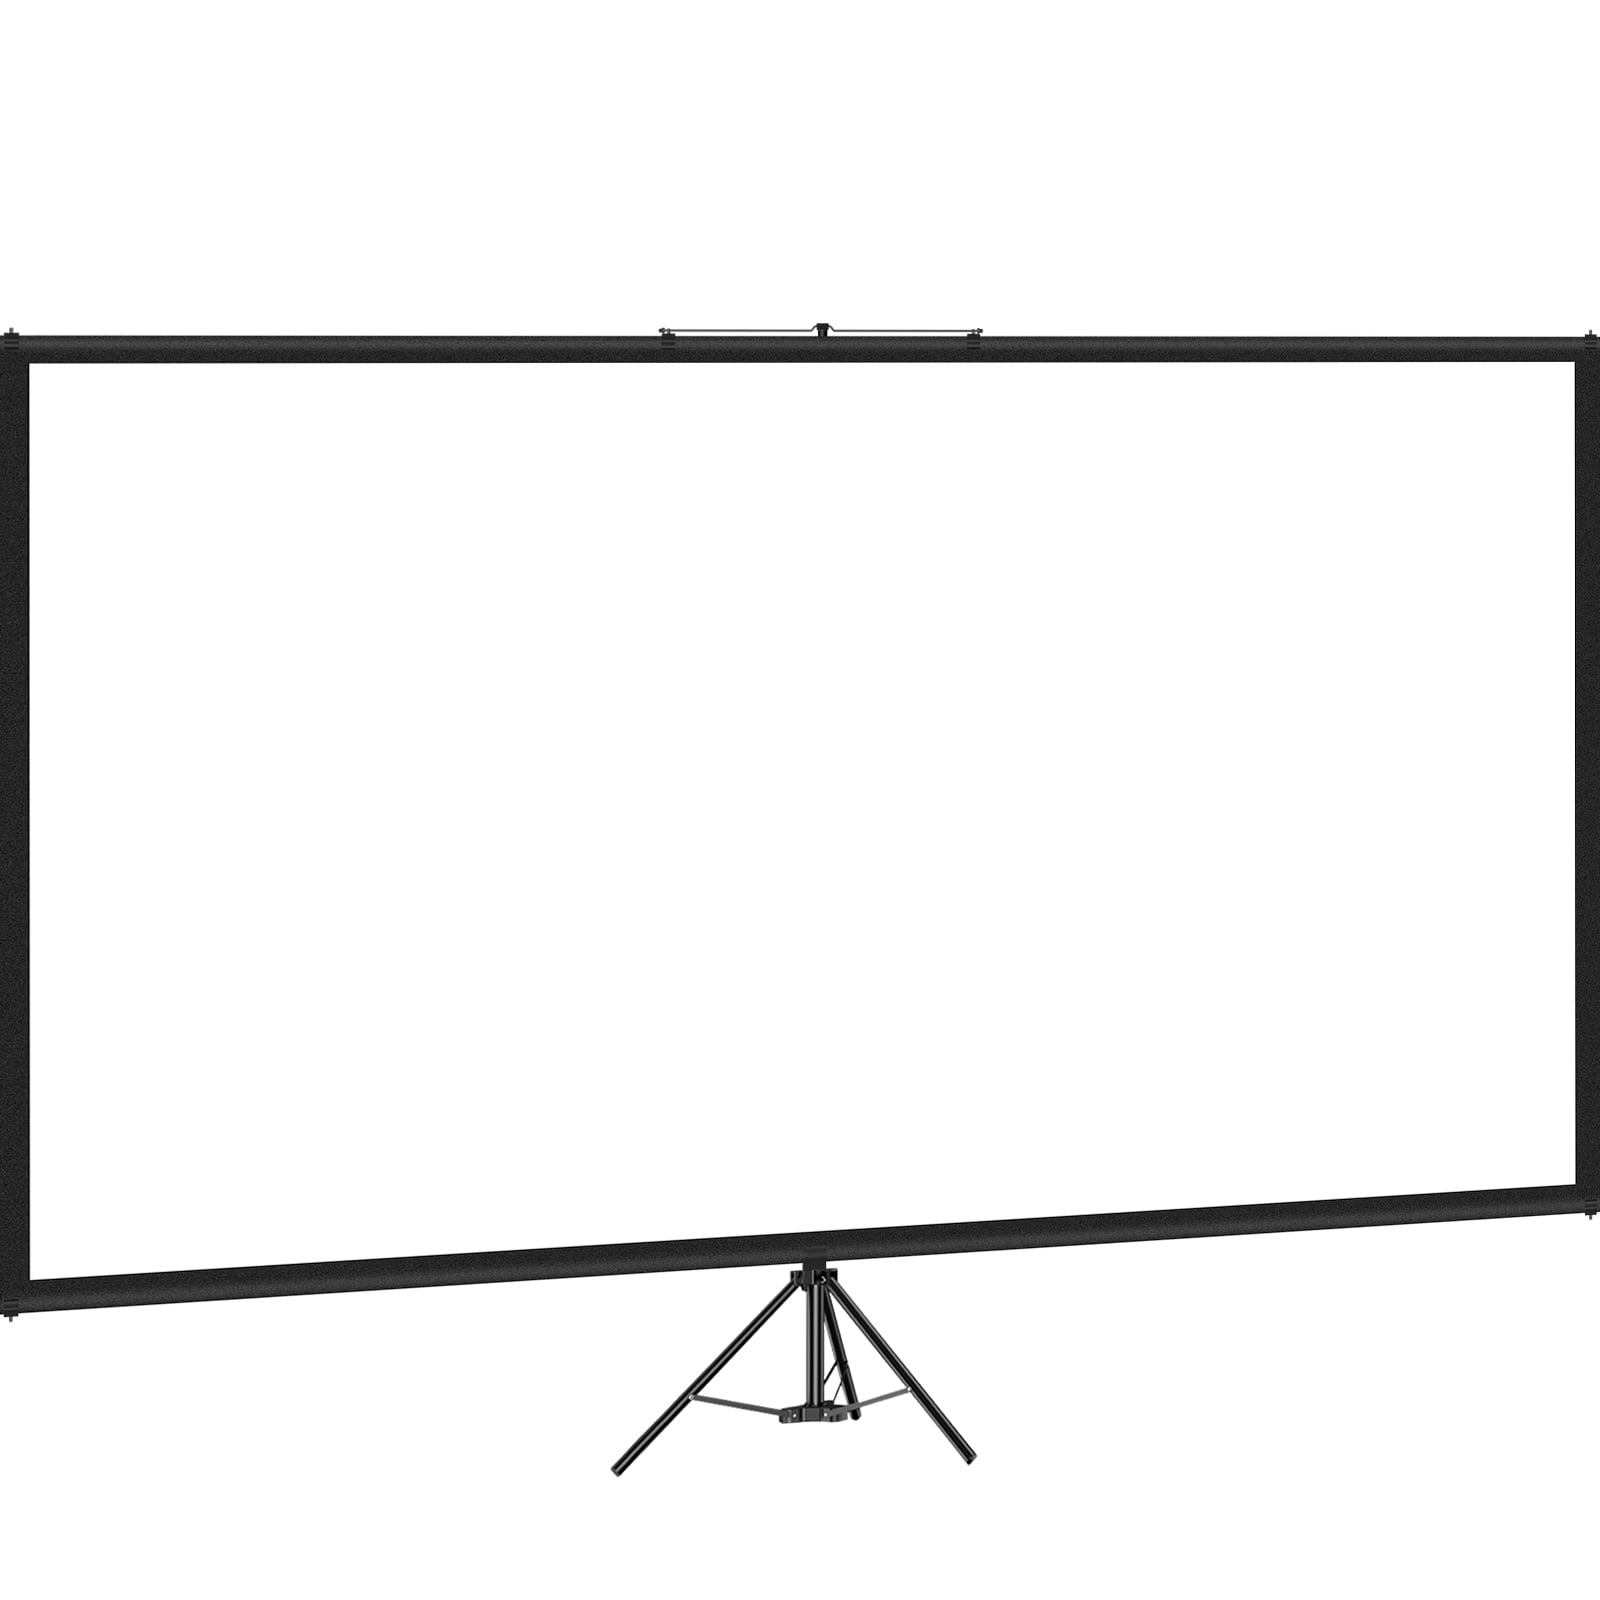 Gaming VEVOR Tripod Projector Screen with Stand 60 inch 16:9 4K HD Projection Screen Stand Wrinkle-Free Height Adjustable Portable Screen for Projector Indoor & Outdoor for Movie Office Home Cinema 